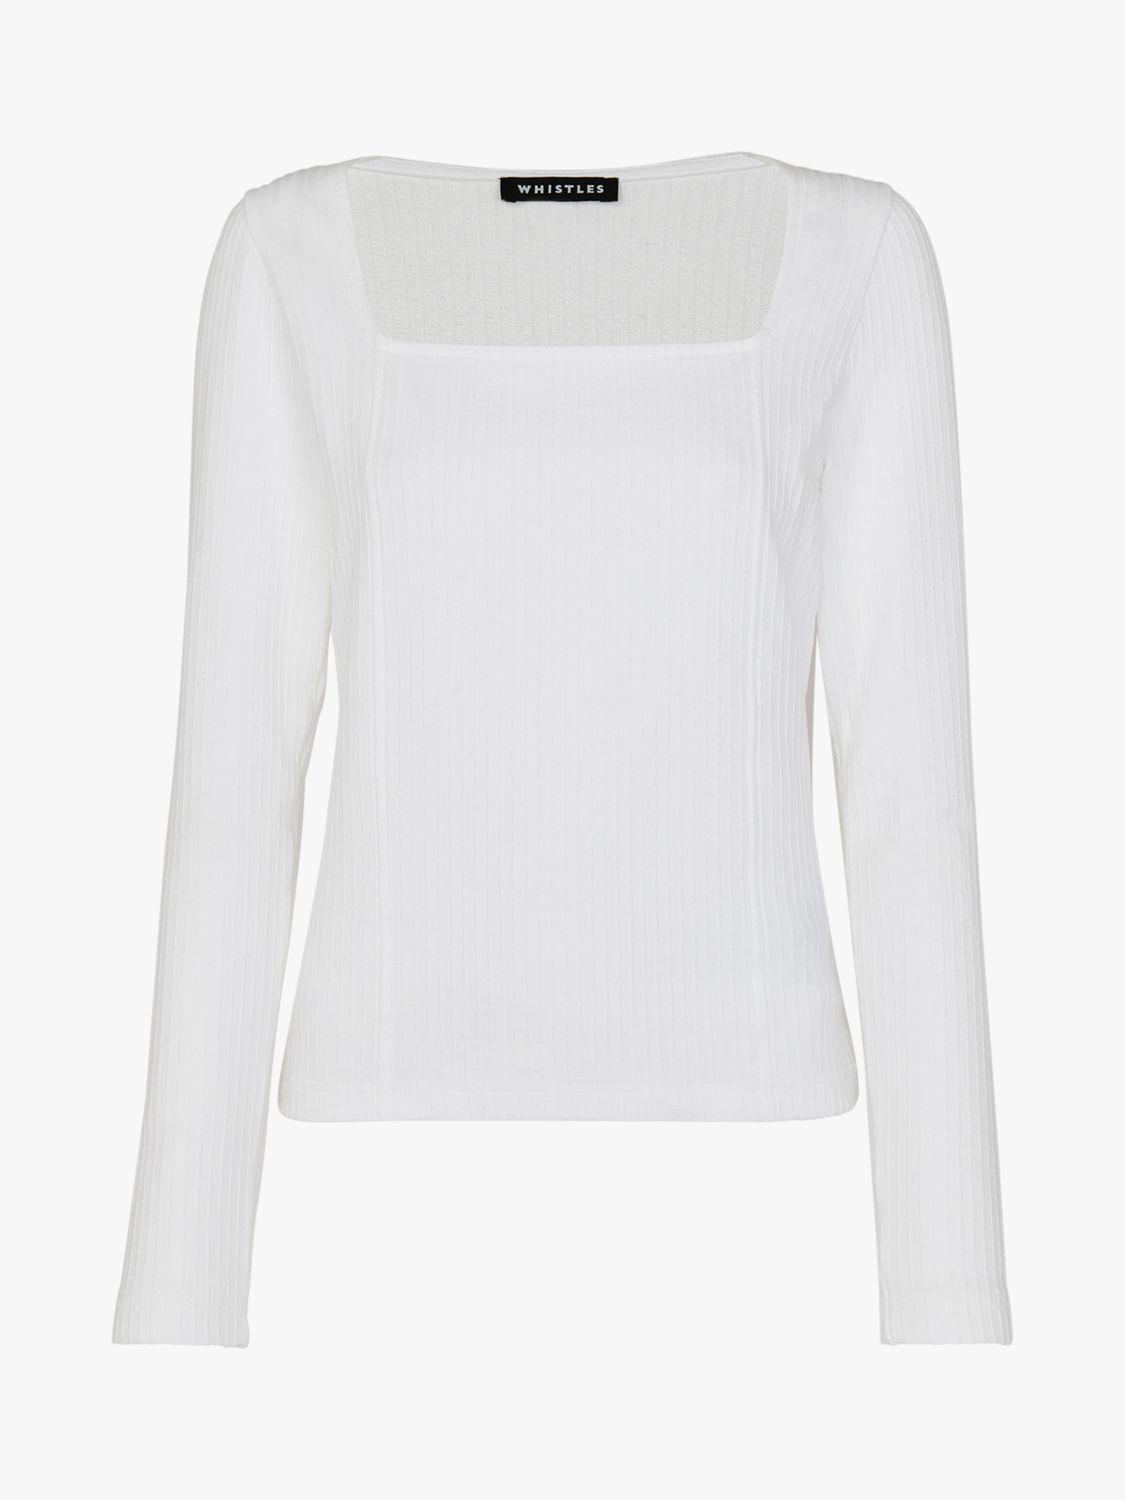 Whistles Square Neck Long Sleeve Ribbed Top, White at John Lewis & Partners